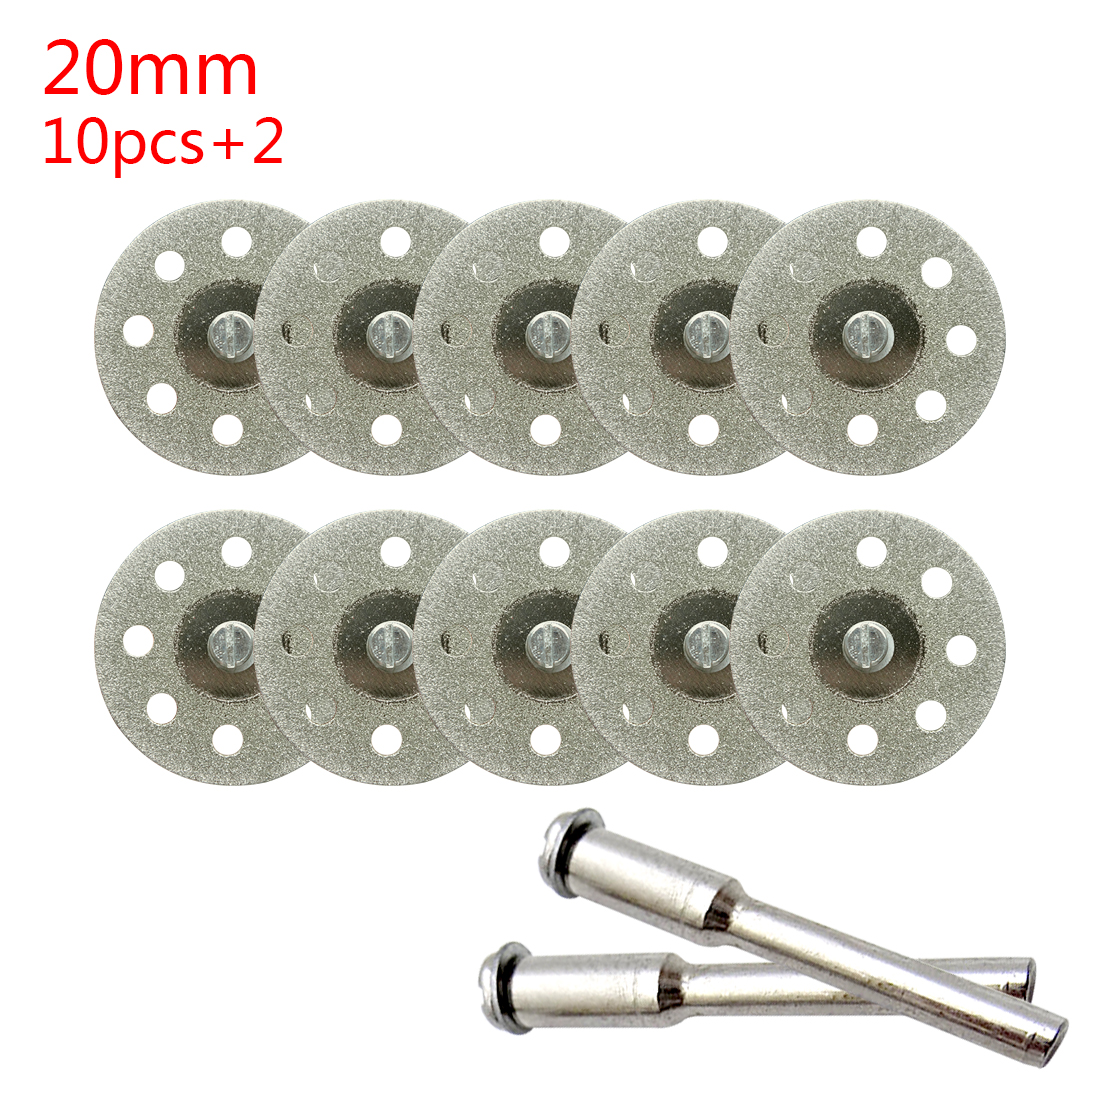 20-25mm 10pcs/5pcs Abrasive Disc Dremel Diamond Grinding Wheel Saw Cutting For Dremel Rotary Tools Accessories with Mandrel